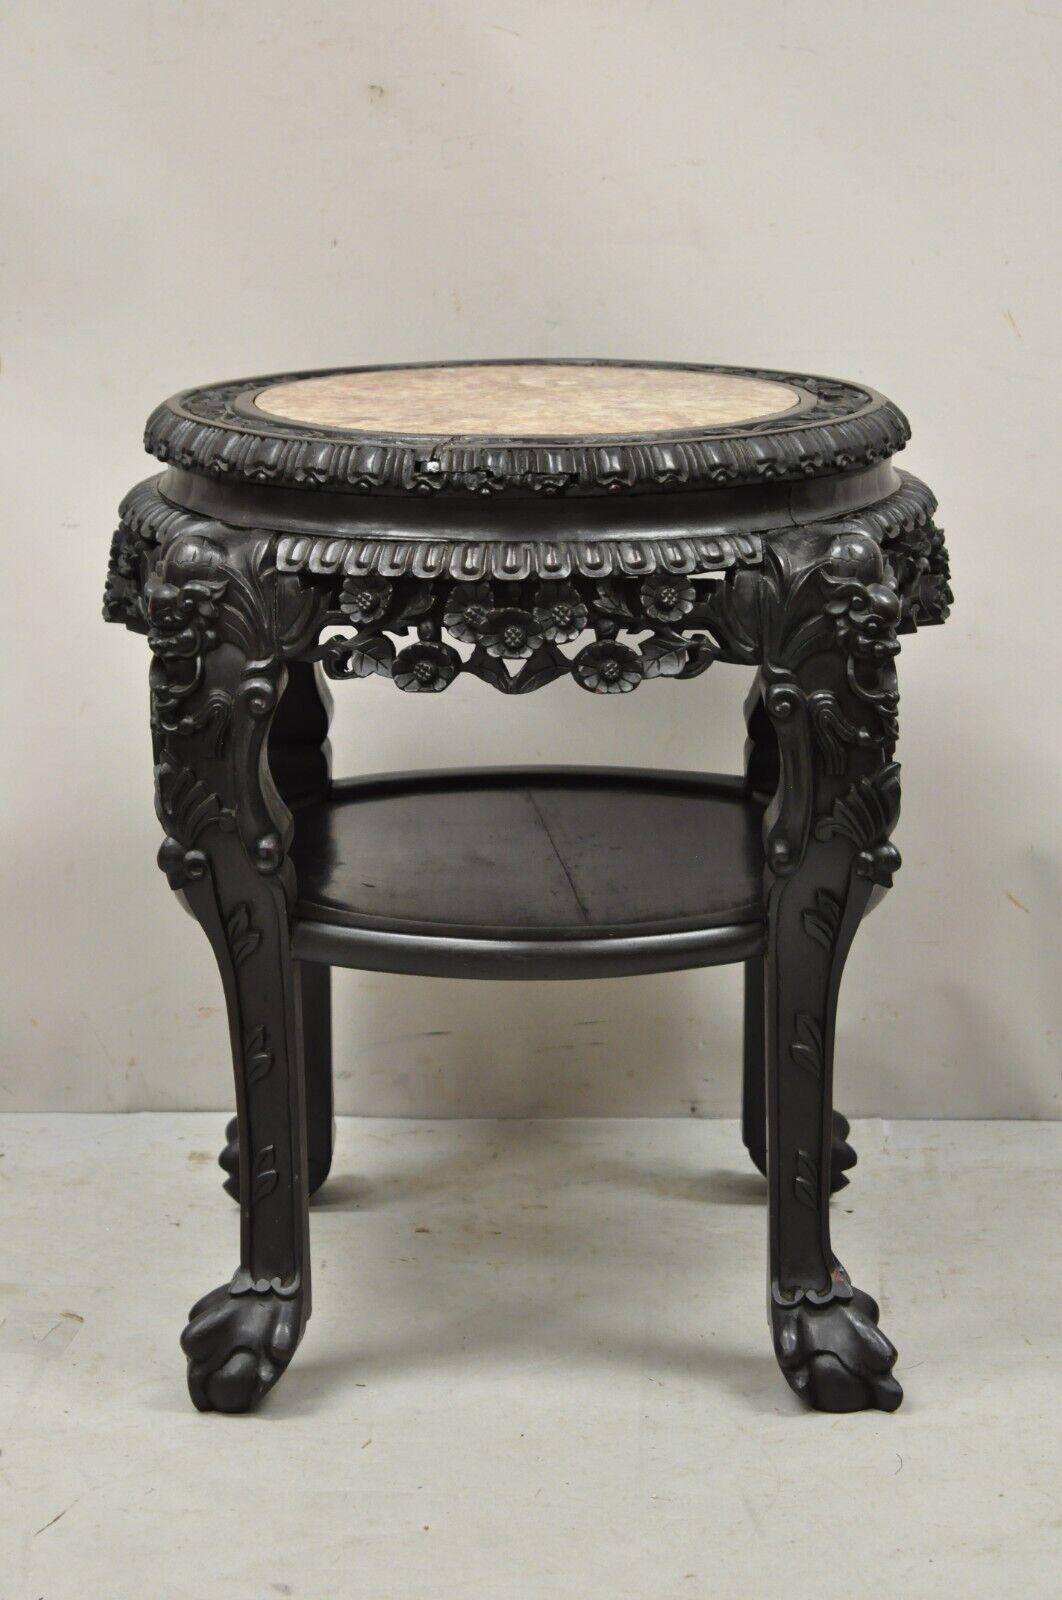 Antique Oriental Chinese carved hardwood marble top foo dog side table. Item features a lower shelf, pink marble top, Foo dog carvings to legs, floral carved skirt, solid wood construction, nicely carved details, very nice antique item. Circa early